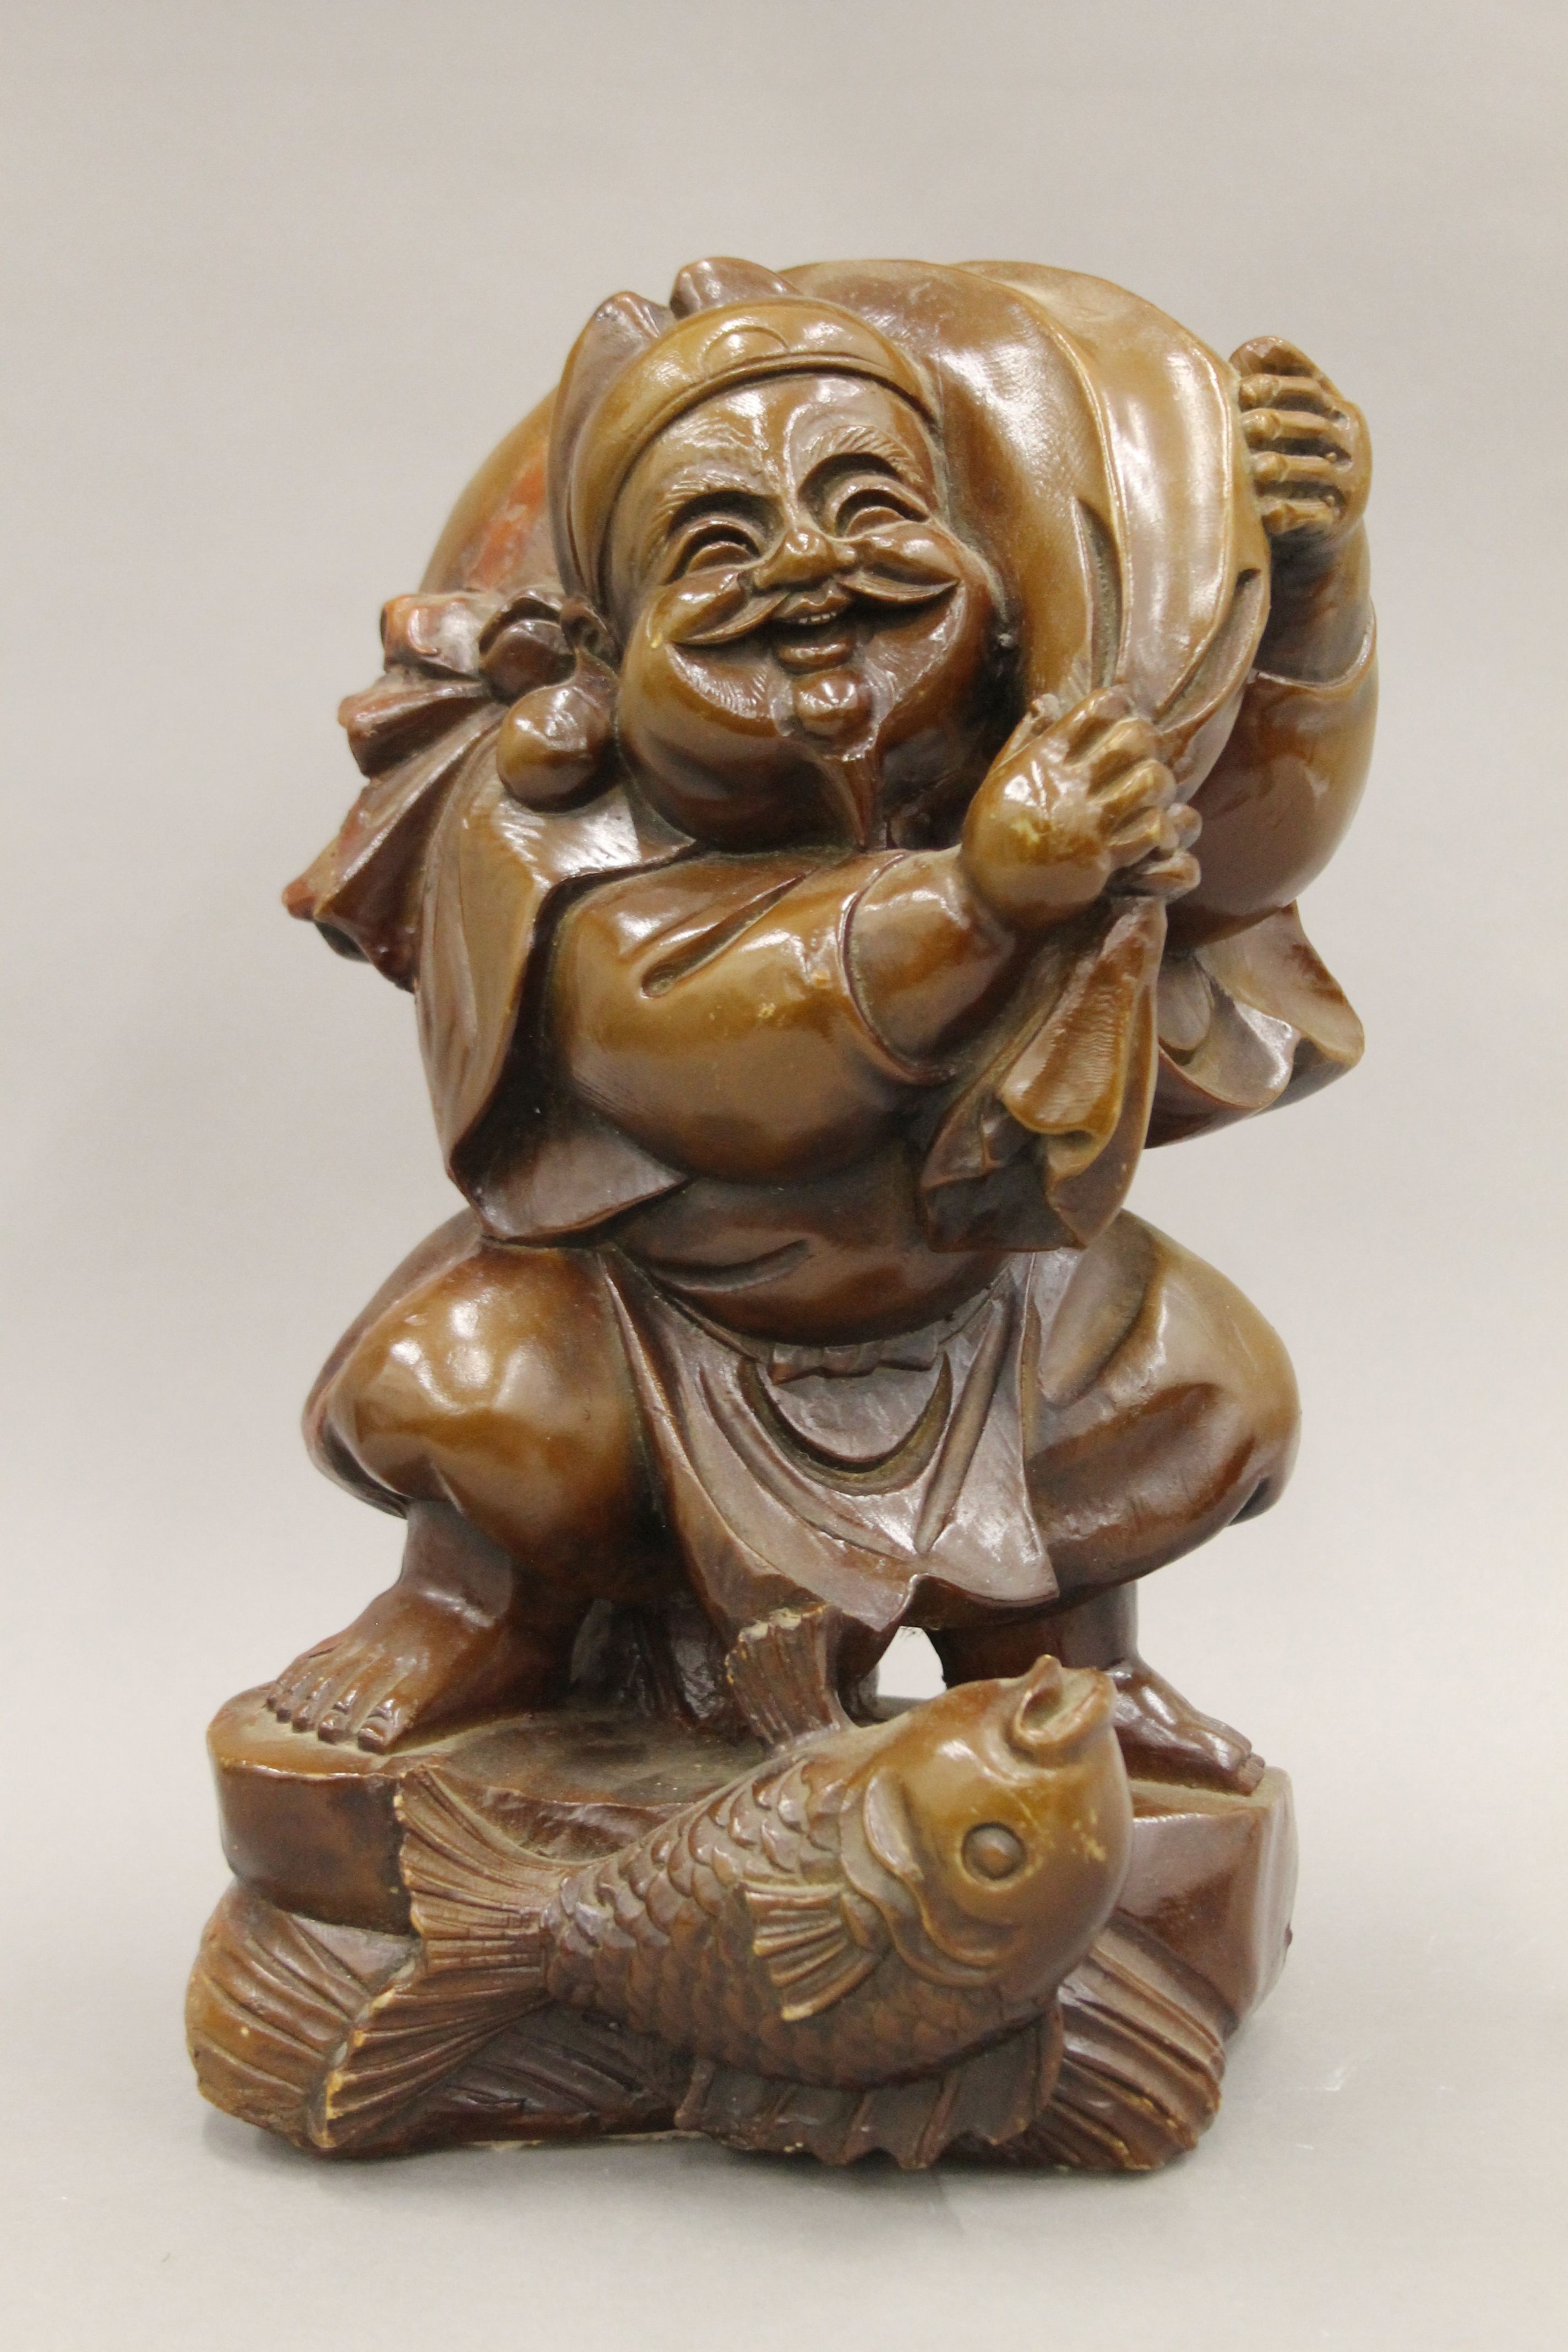 A model of a Japanese fisherman. 37 cm high.